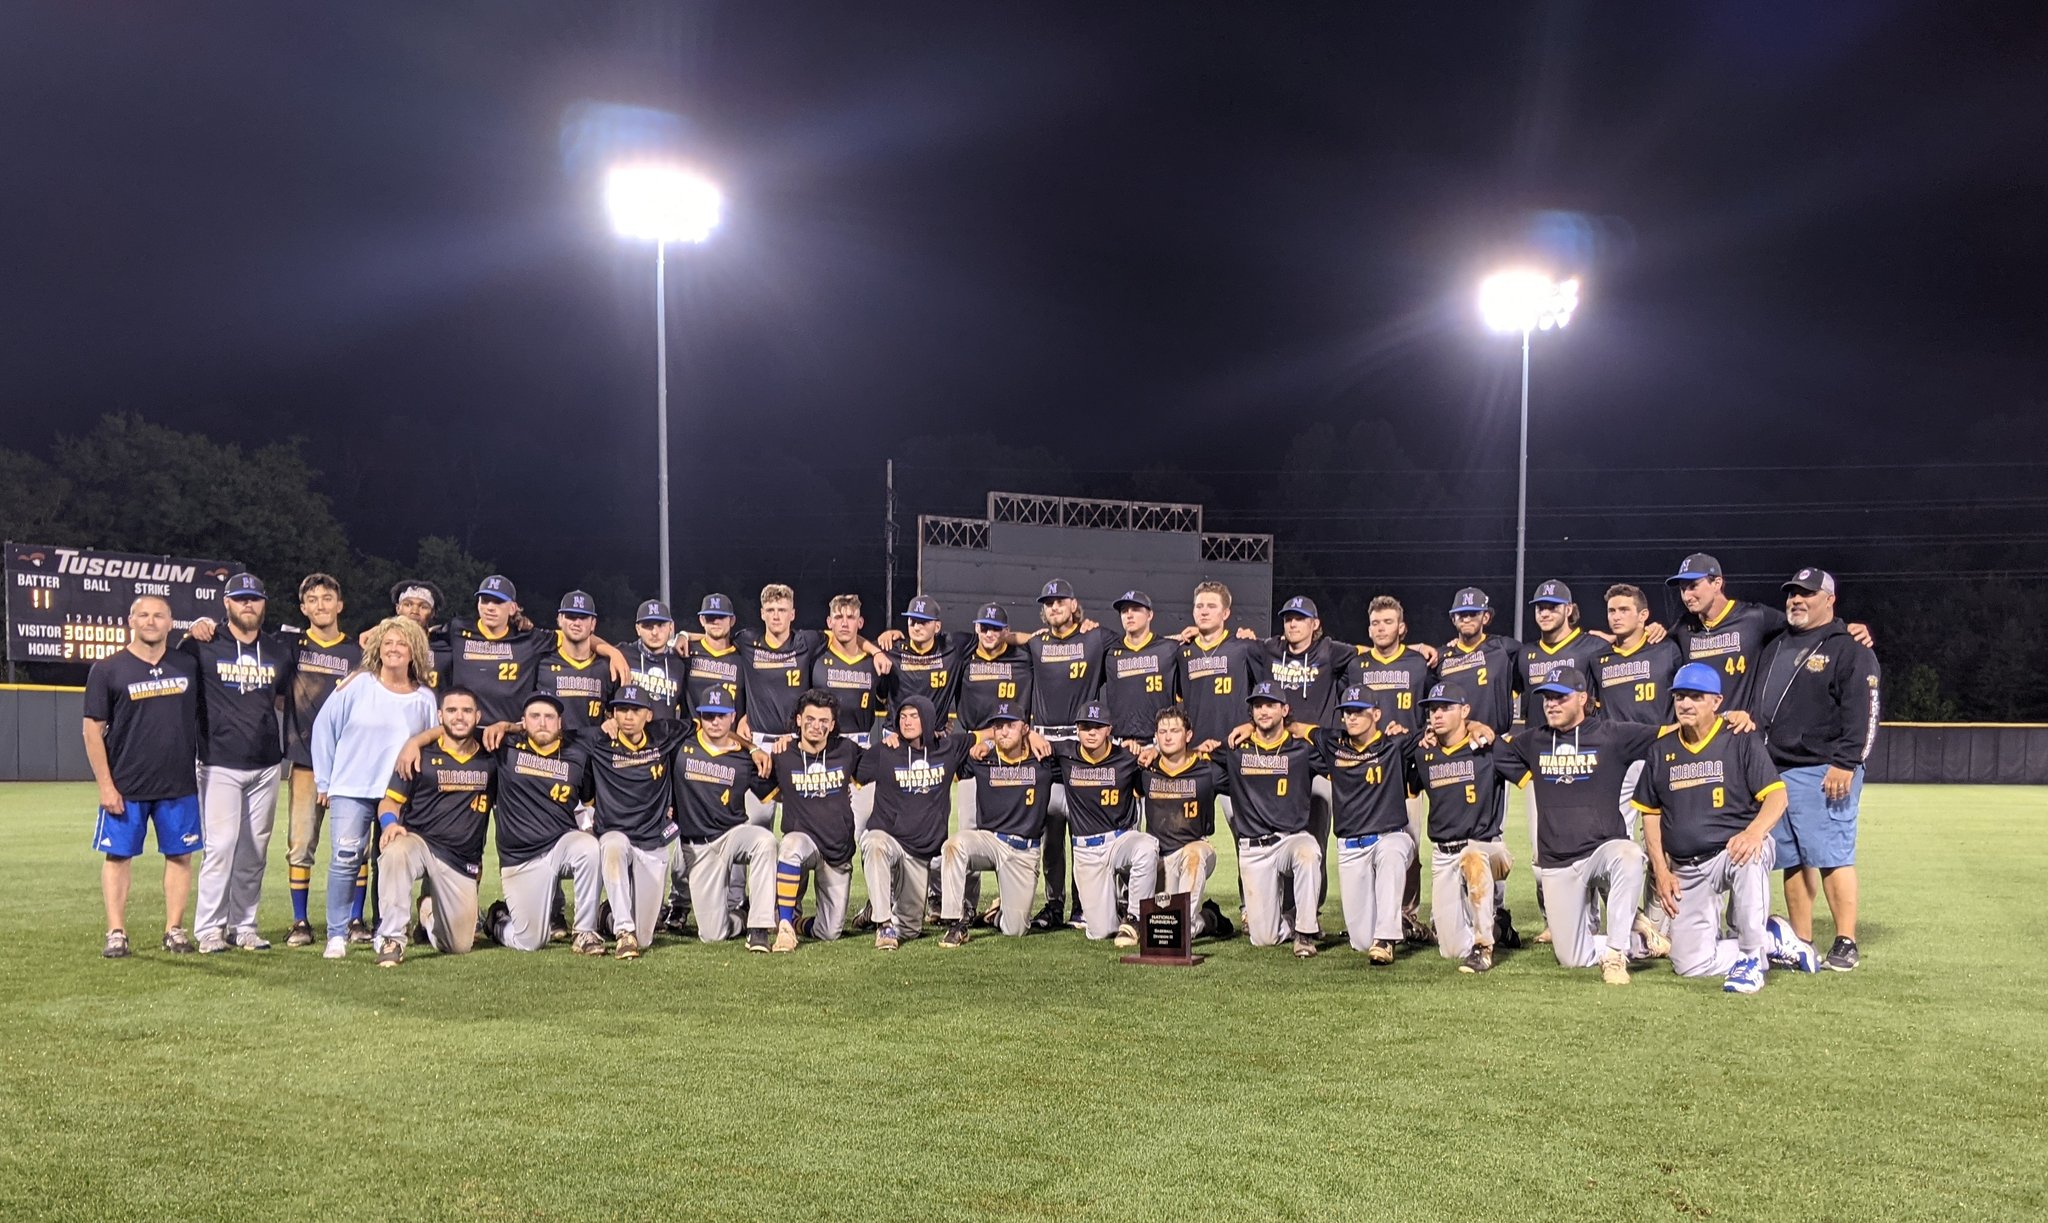 NCCC baseball finishes second in nation